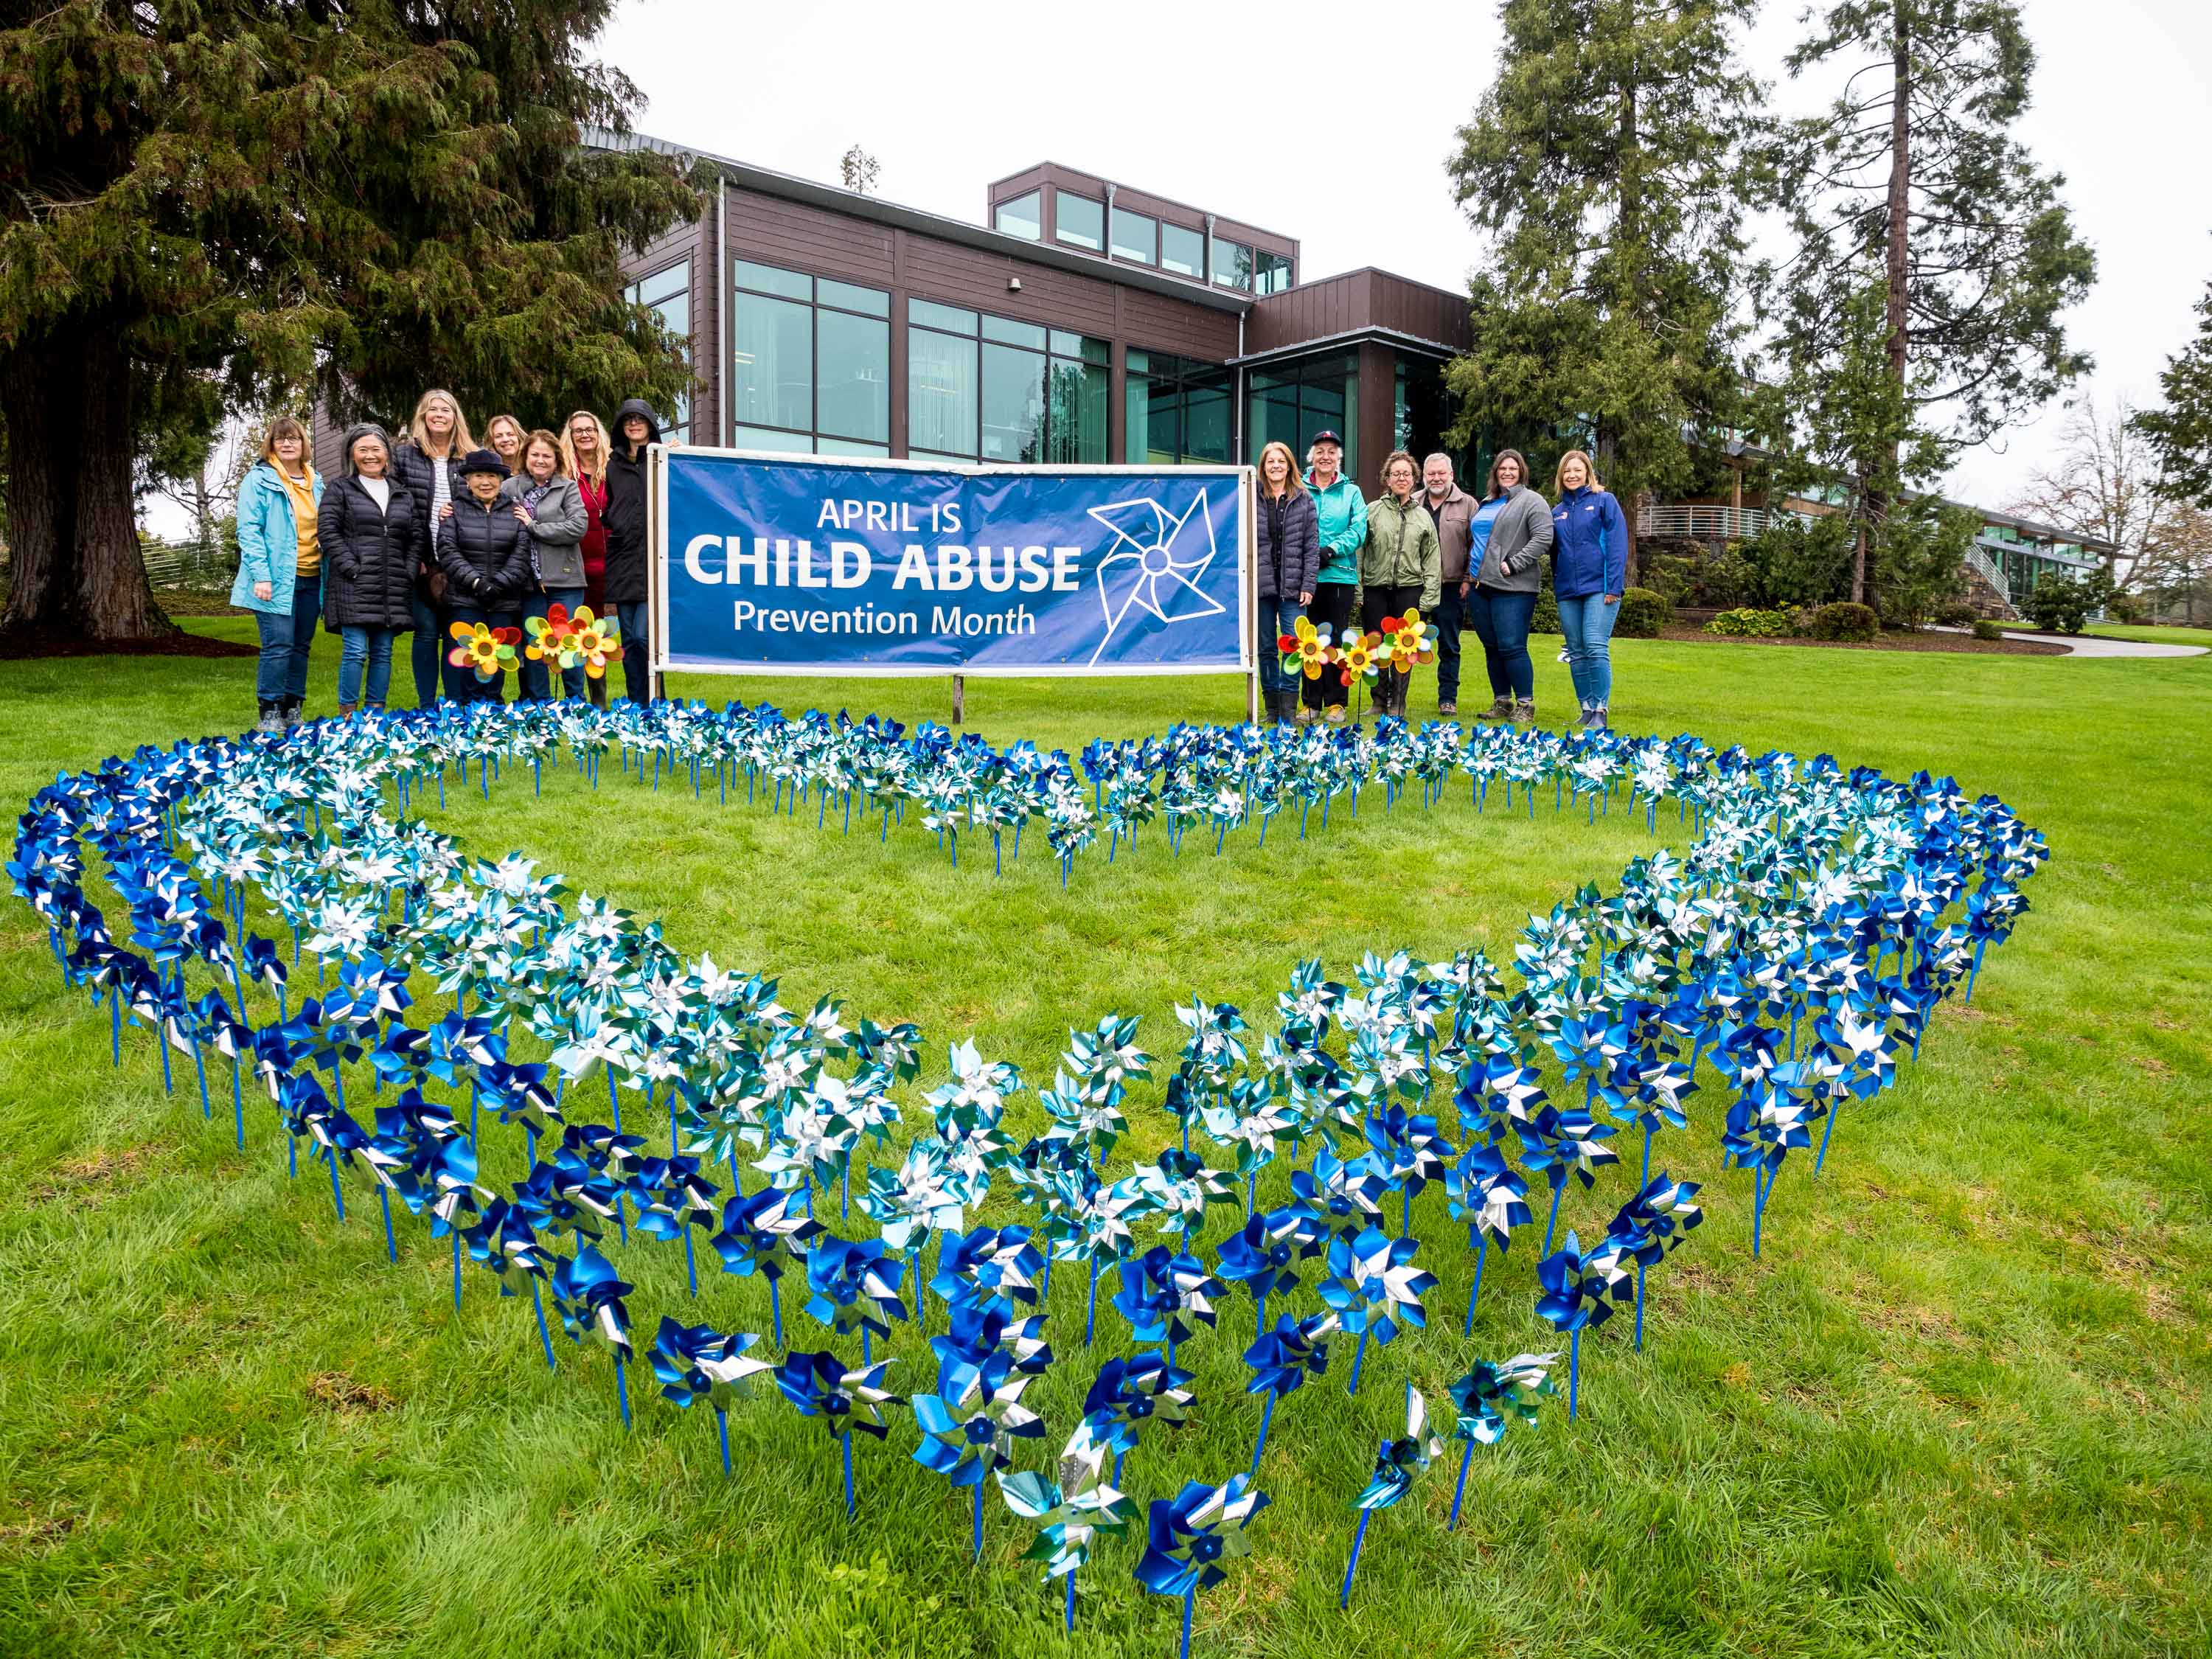 A group of people stands behind a large heart made of pinwheels planted into grass. A banner reads April is Child Abuse Prevention Month.